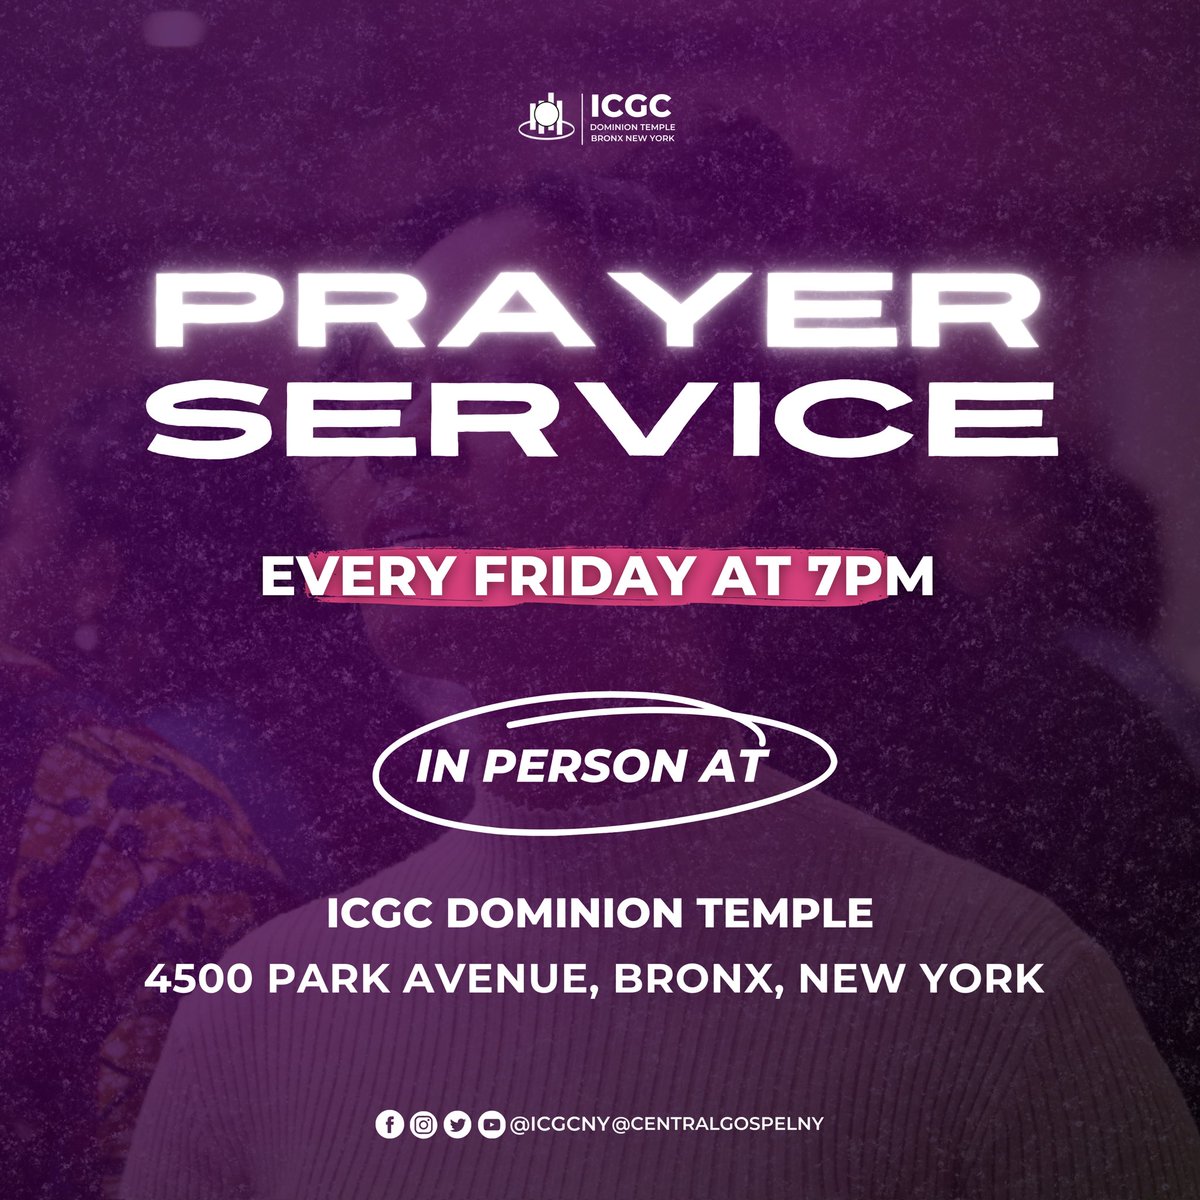 JOIN US TONIGHT at 7PM for Corporate Prayer 🙌🏾 Invite a brother or sister and let’s intercede🔥 
Theme: GOD
•
⚪️Location: 4500 Park Ave. Bronx, NY 10457
🔴 YouTube: ICGC NY Dominion Temple
🔵 FaceBook: @ICGCNewYork
•
#WeAreICGC #ICGCWorldwide #ICGCDTNY #explorepage